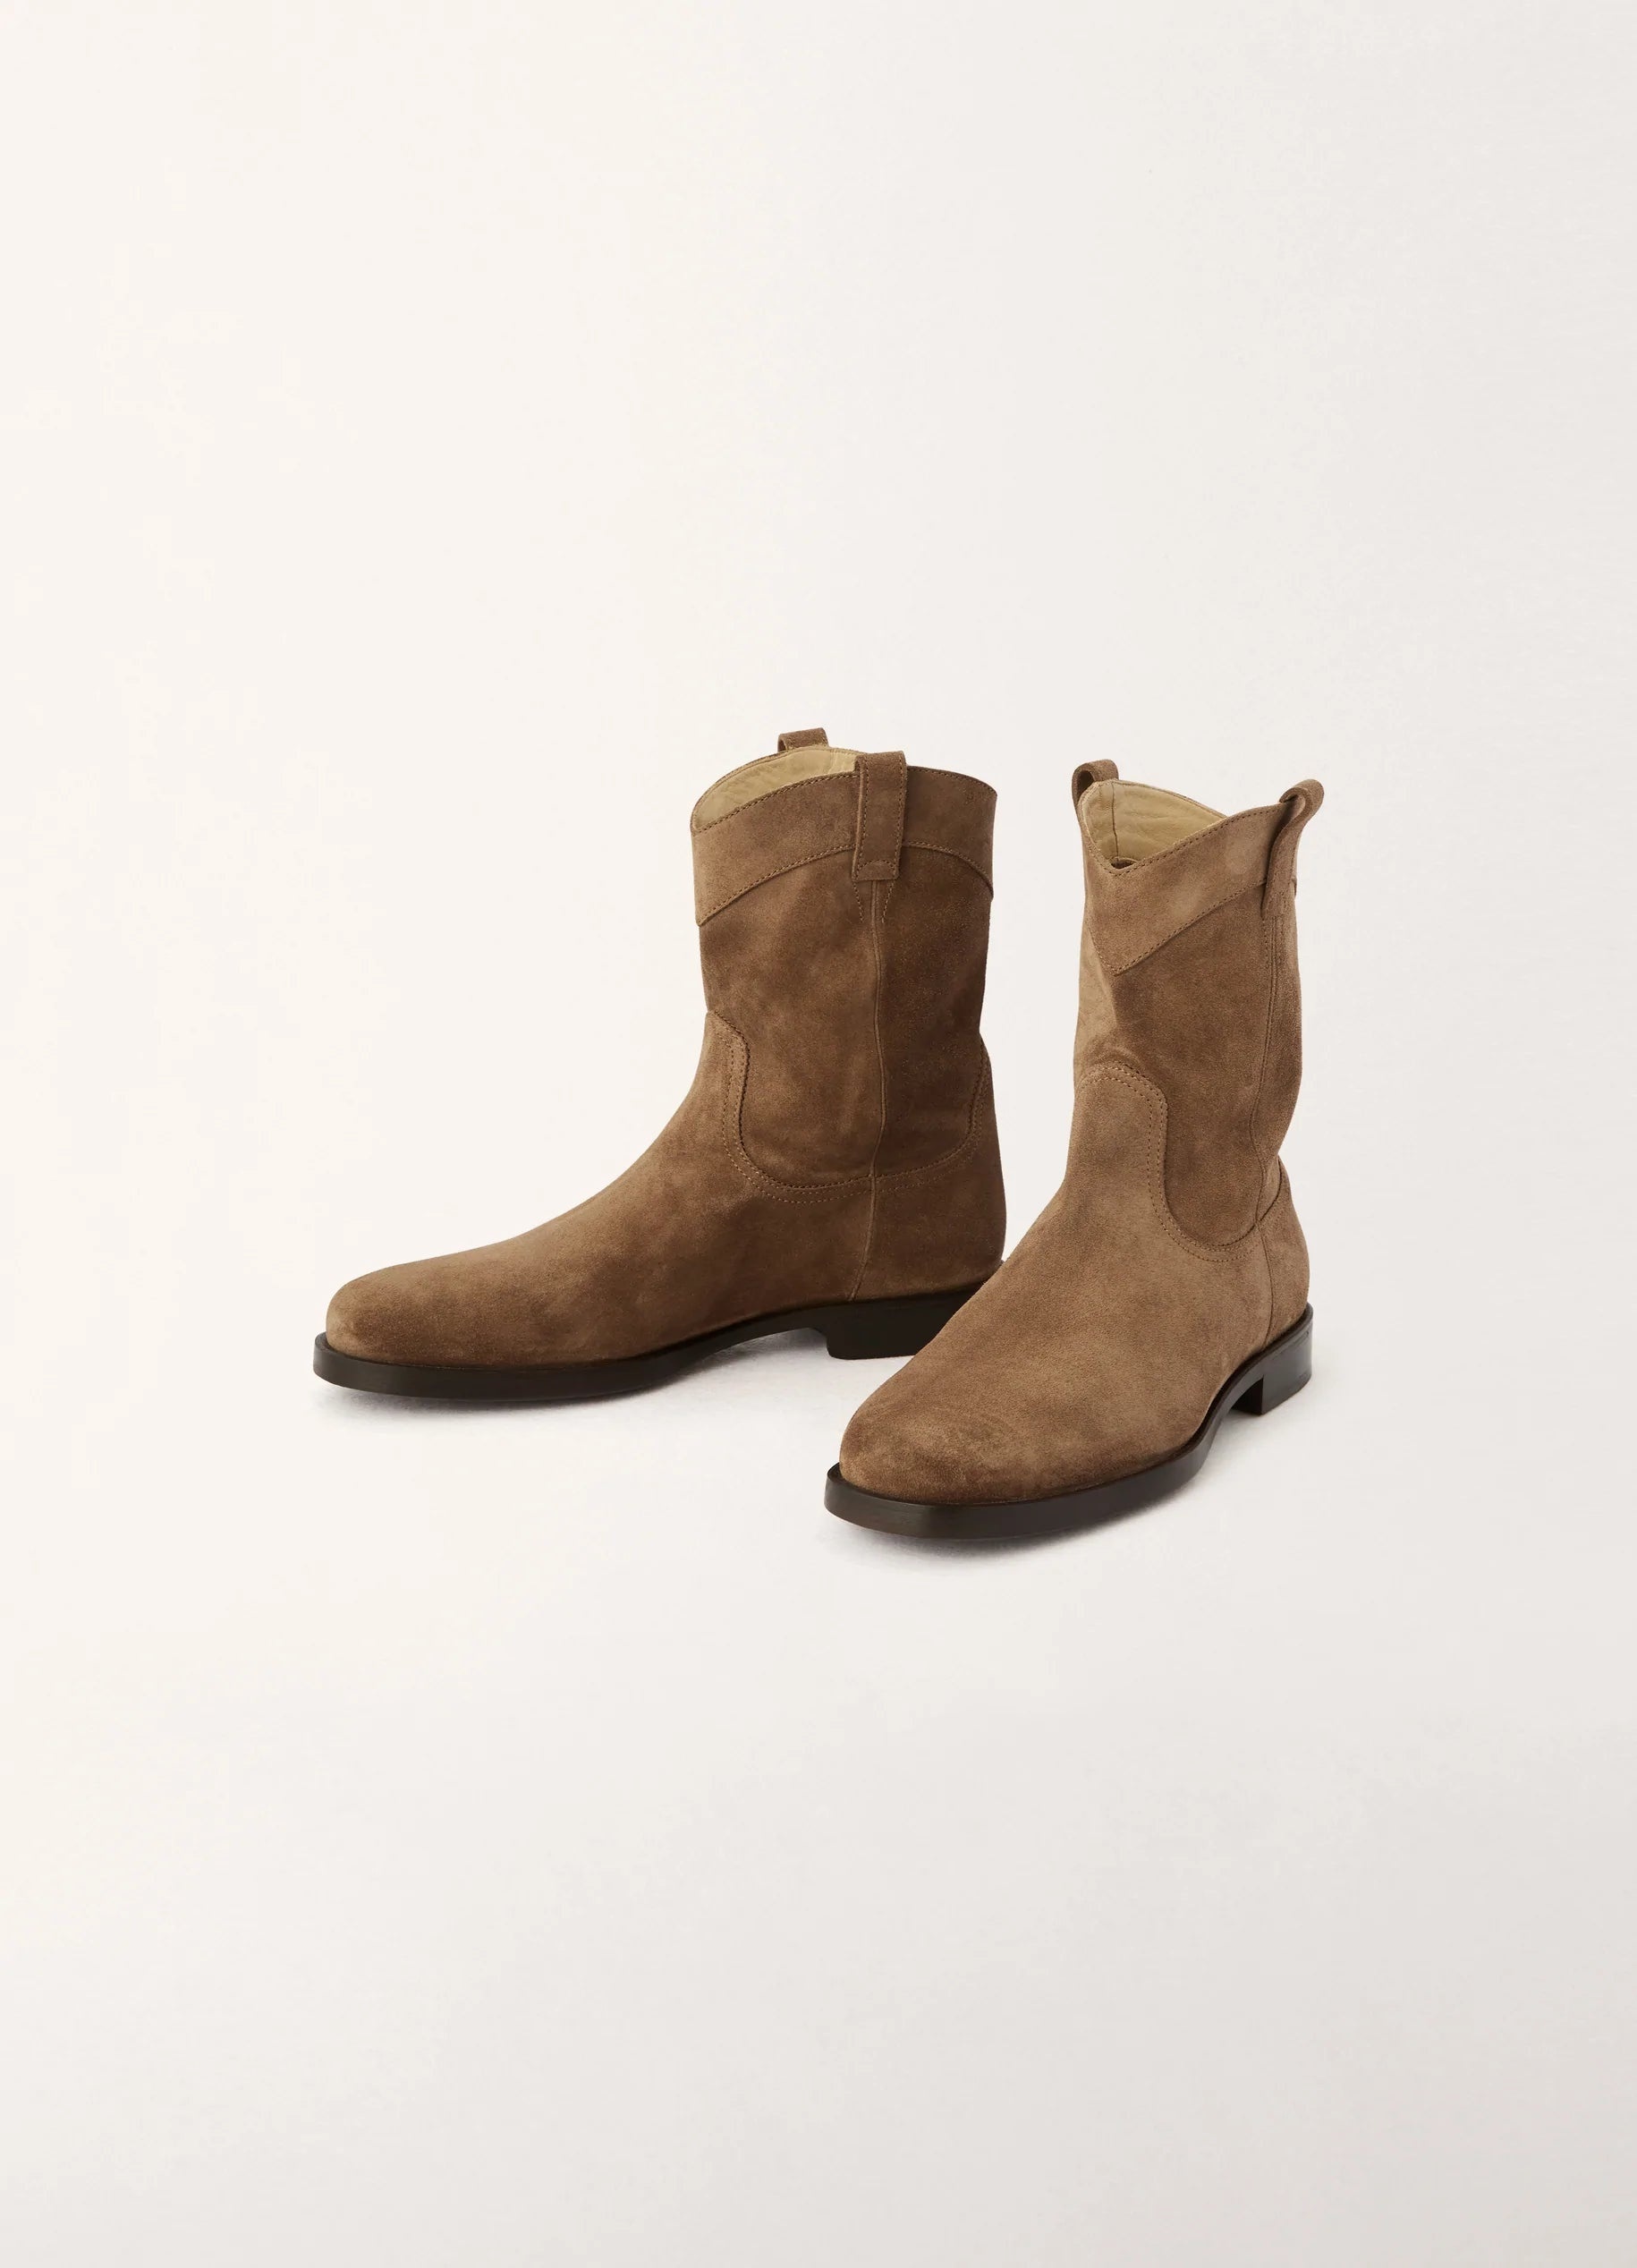 WESTERN BOOTS
WAXED SUEDE LTH - 2